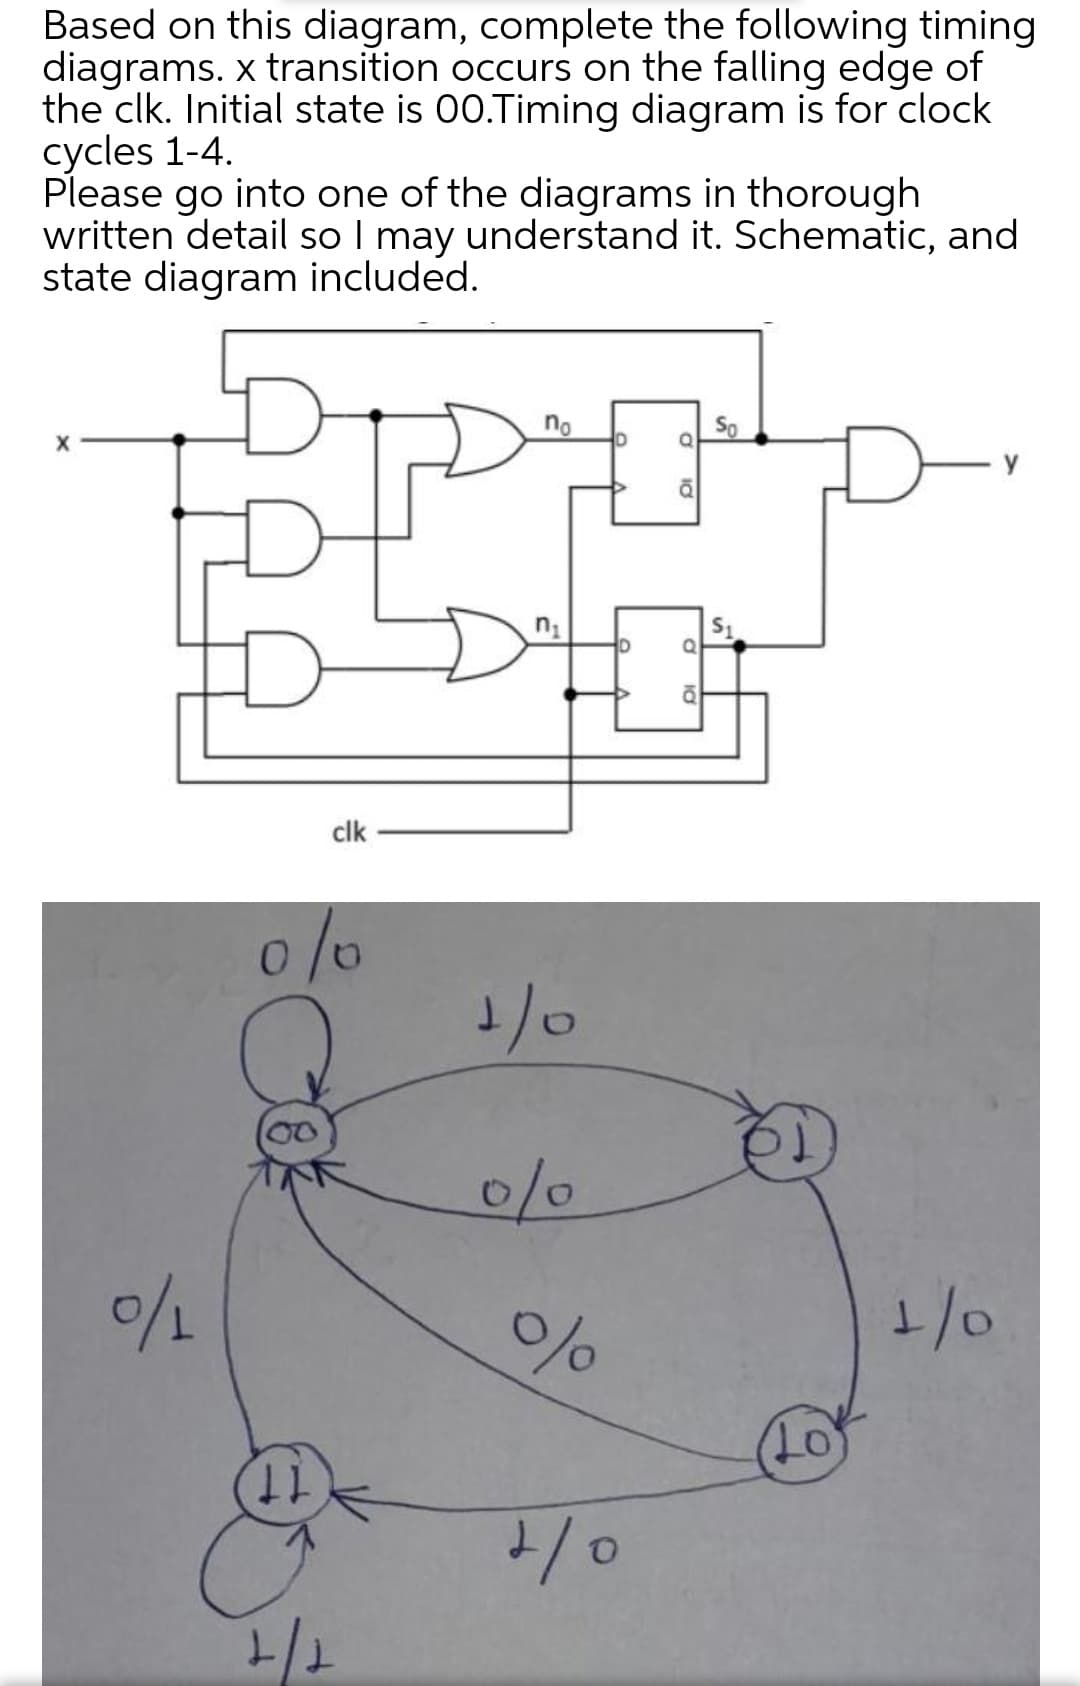 Based on this diagram, complete the following timing
diagrams. x transition occurs on the falling edge of
the clk. Initial state is 00.Timing diagram is for clock
cycles 1-4.
Please go into one of the diagrams in thorough
written detail so I may understand it. Schematic, and
state diagram included.
|
no
clk
0/0
0/0
1/0
